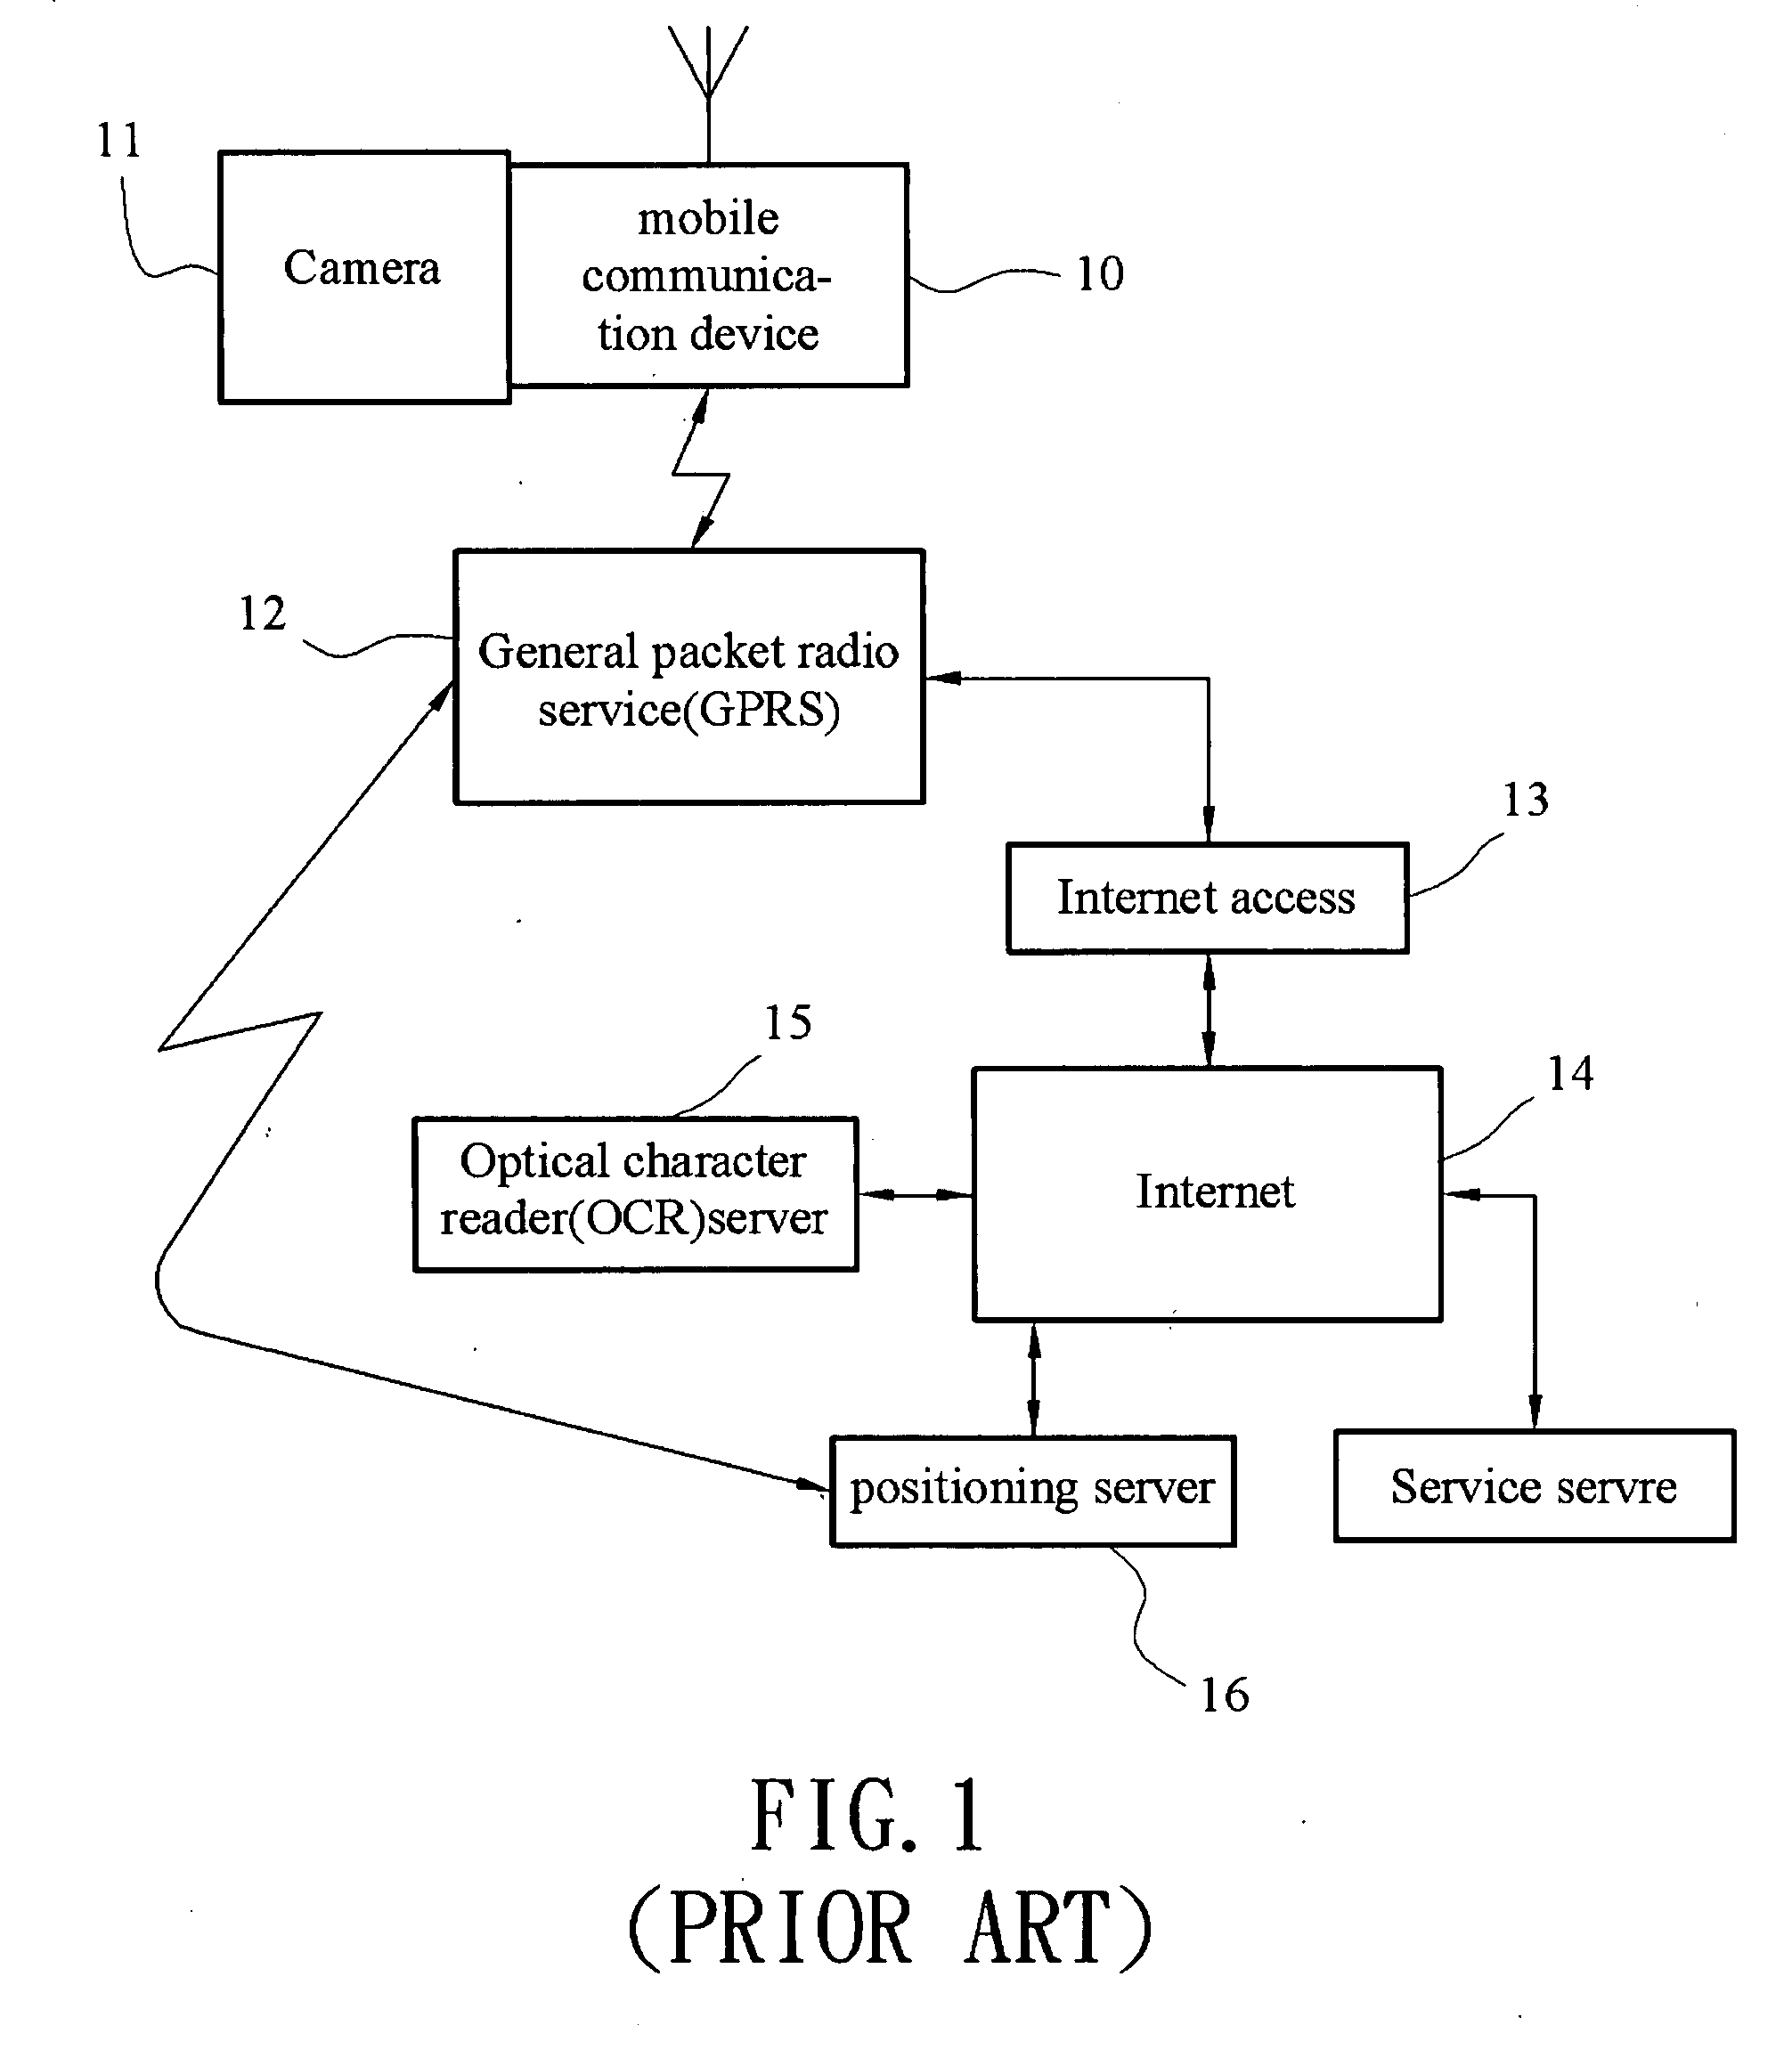 Method and system of using mobile communication apparatus for translating image text